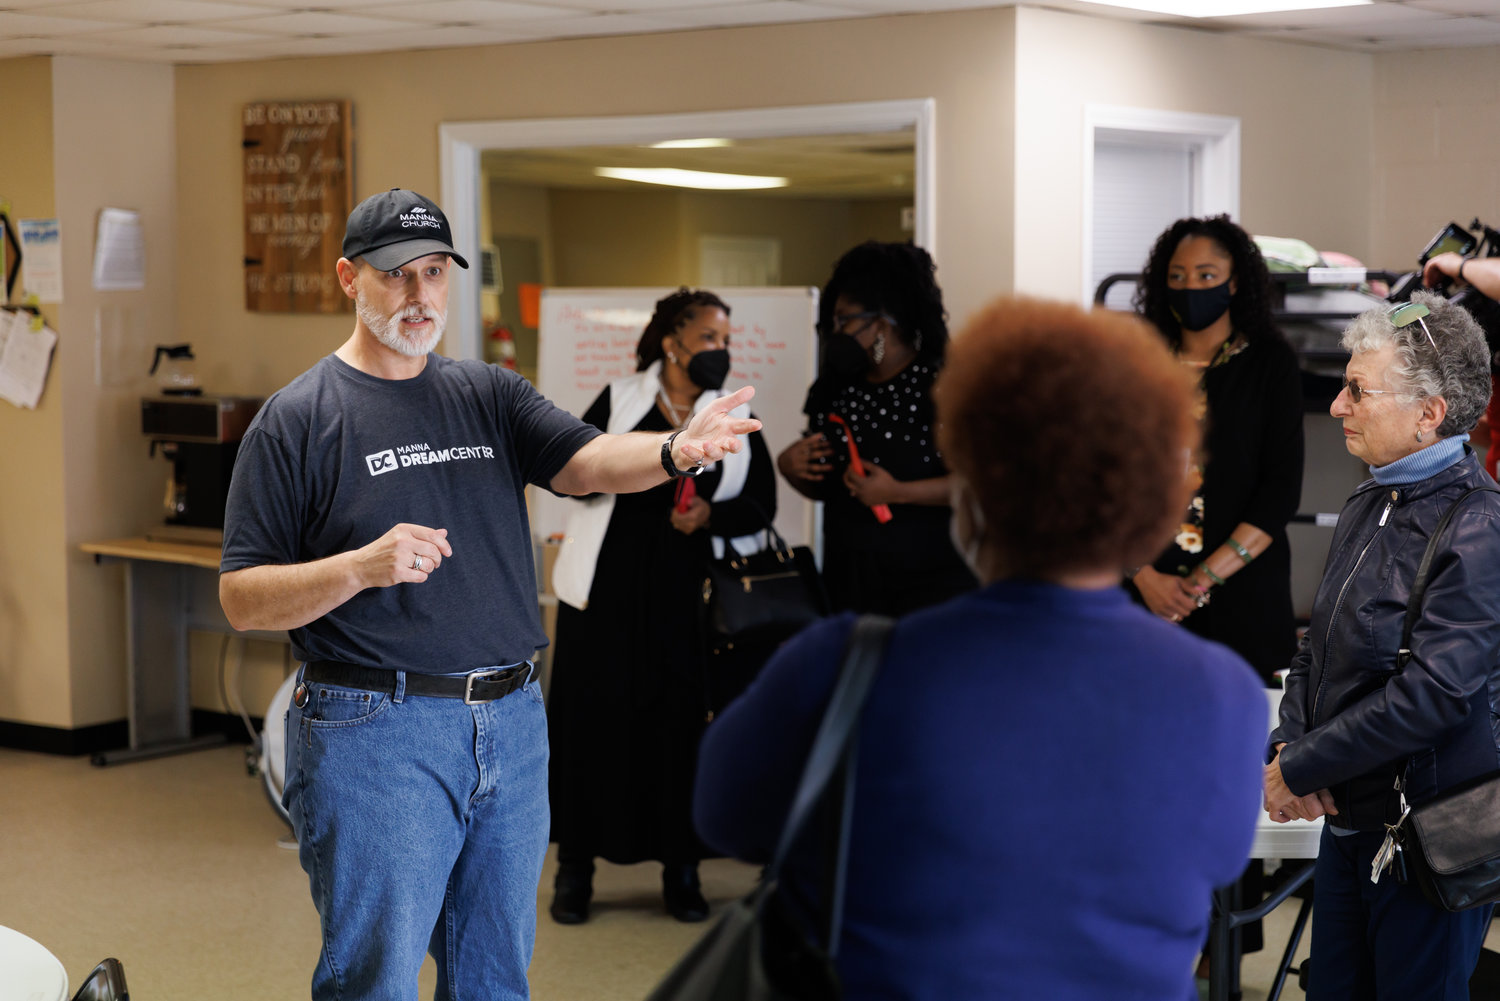 Ed Robillard, the director of the two Manna Dream Centers in Fayetteville, begins a tour of the Person Street shelter following the ribbon-cutting ceremony Friday.